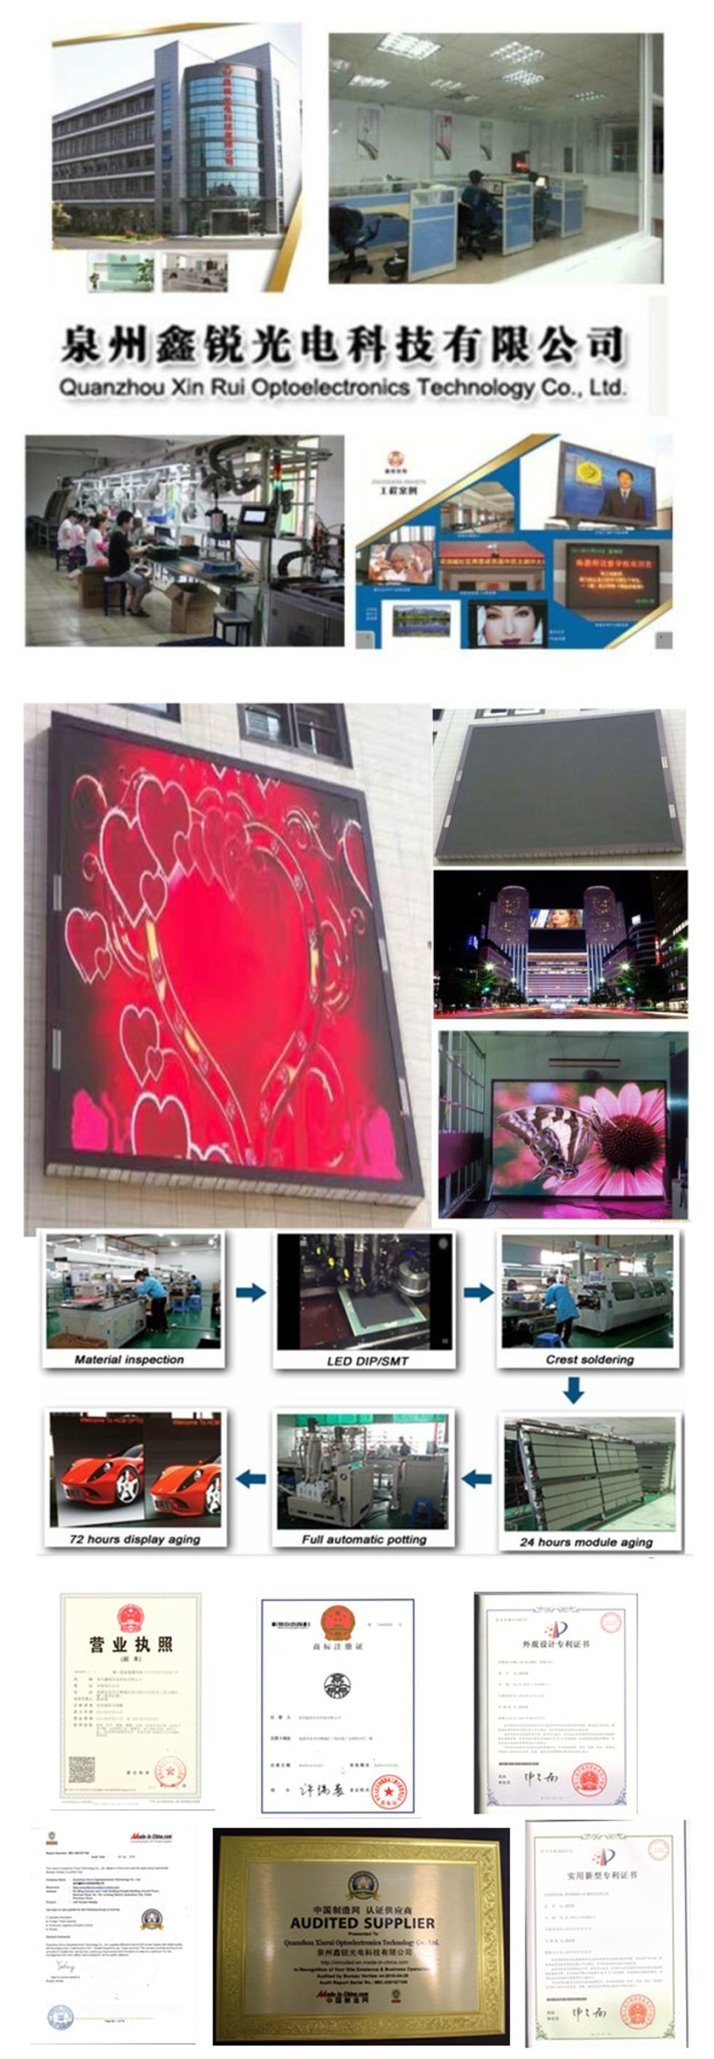 Outdoor Wall Mount LED Sign P4/P5/P6/P8/P10 SMD Screen Advertising Display